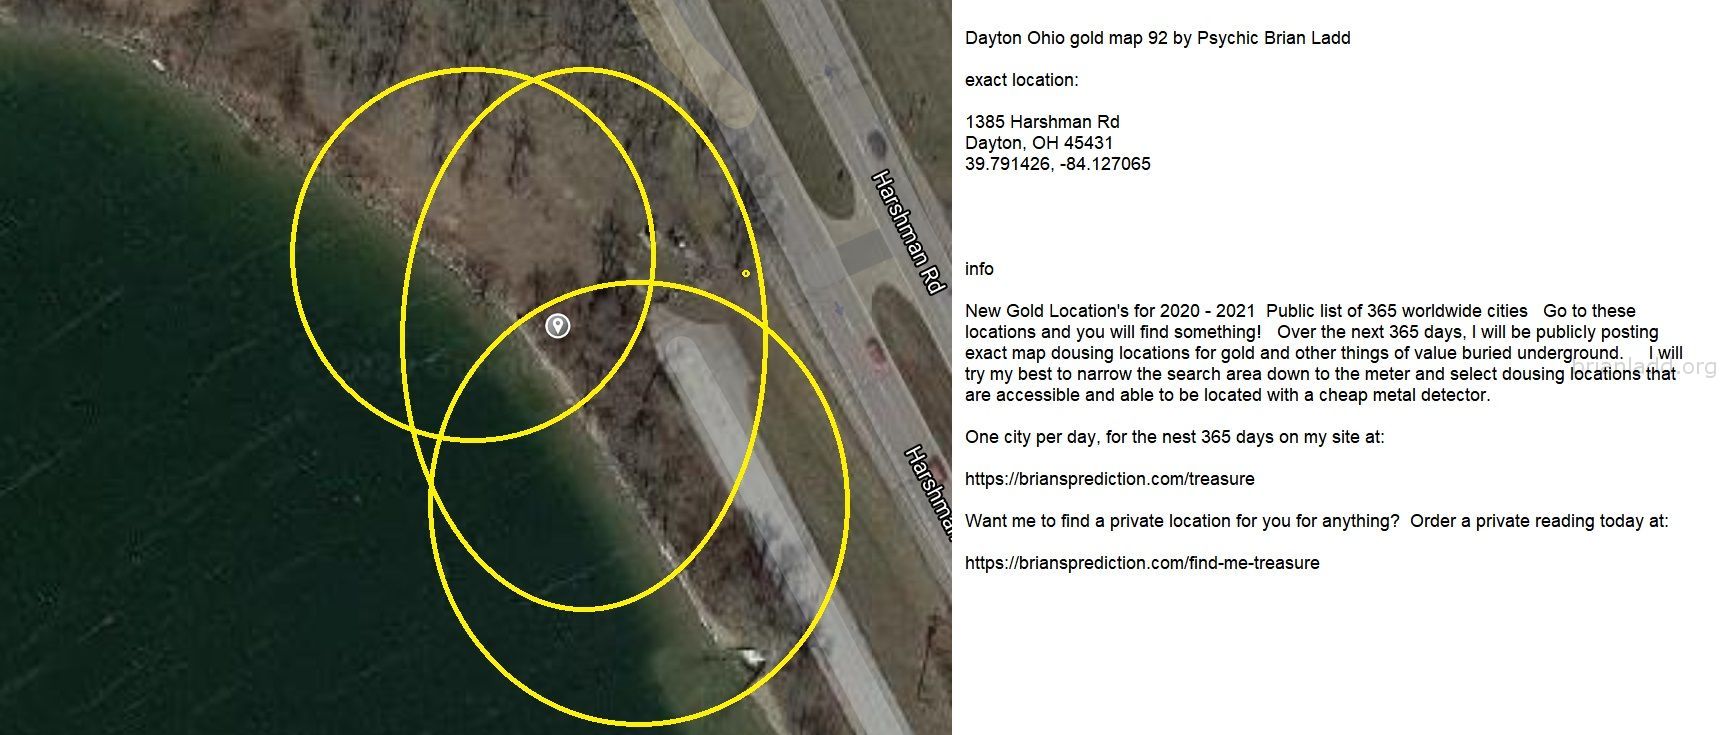 Dayton Ohio Gold Map 92 By Psychic Brian Ladd - Dayton Ohio Gold Map 92 By Psychic Brian Ladd  Exact Location:  1385 Har...
Dayton Ohio Gold Map 92 By Psychic Brian Ladd  Exact Location:  1385 Harshman Rd  Dayton, Oh 45431  39.791426, -84.127065  Info  New Gold Location'S For 2020 - 2021  Public List Of 365 Worldwide Cities  Go To These Locations And You Will Find Something!  Over The Next 365 Days, I Will Be Publicly Posting Exact Map Dousing Locations For Gold And Other Things Of Value Buried Underground.  I Will Try My Best To Narrow The Search Area Down To The Meter And Select Dousing Locations That Are Accessible And Able To Be Located With A Cheap Metal Detector.  One City Per Day, For The Nest 365 Days On My Site At:   https://briansprediction.com/Treasure  Want Me To Find A Private Location For You For Anything?  Order A Private Reading Today At:   https://briansprediction.com/Find-Me-Treasure
